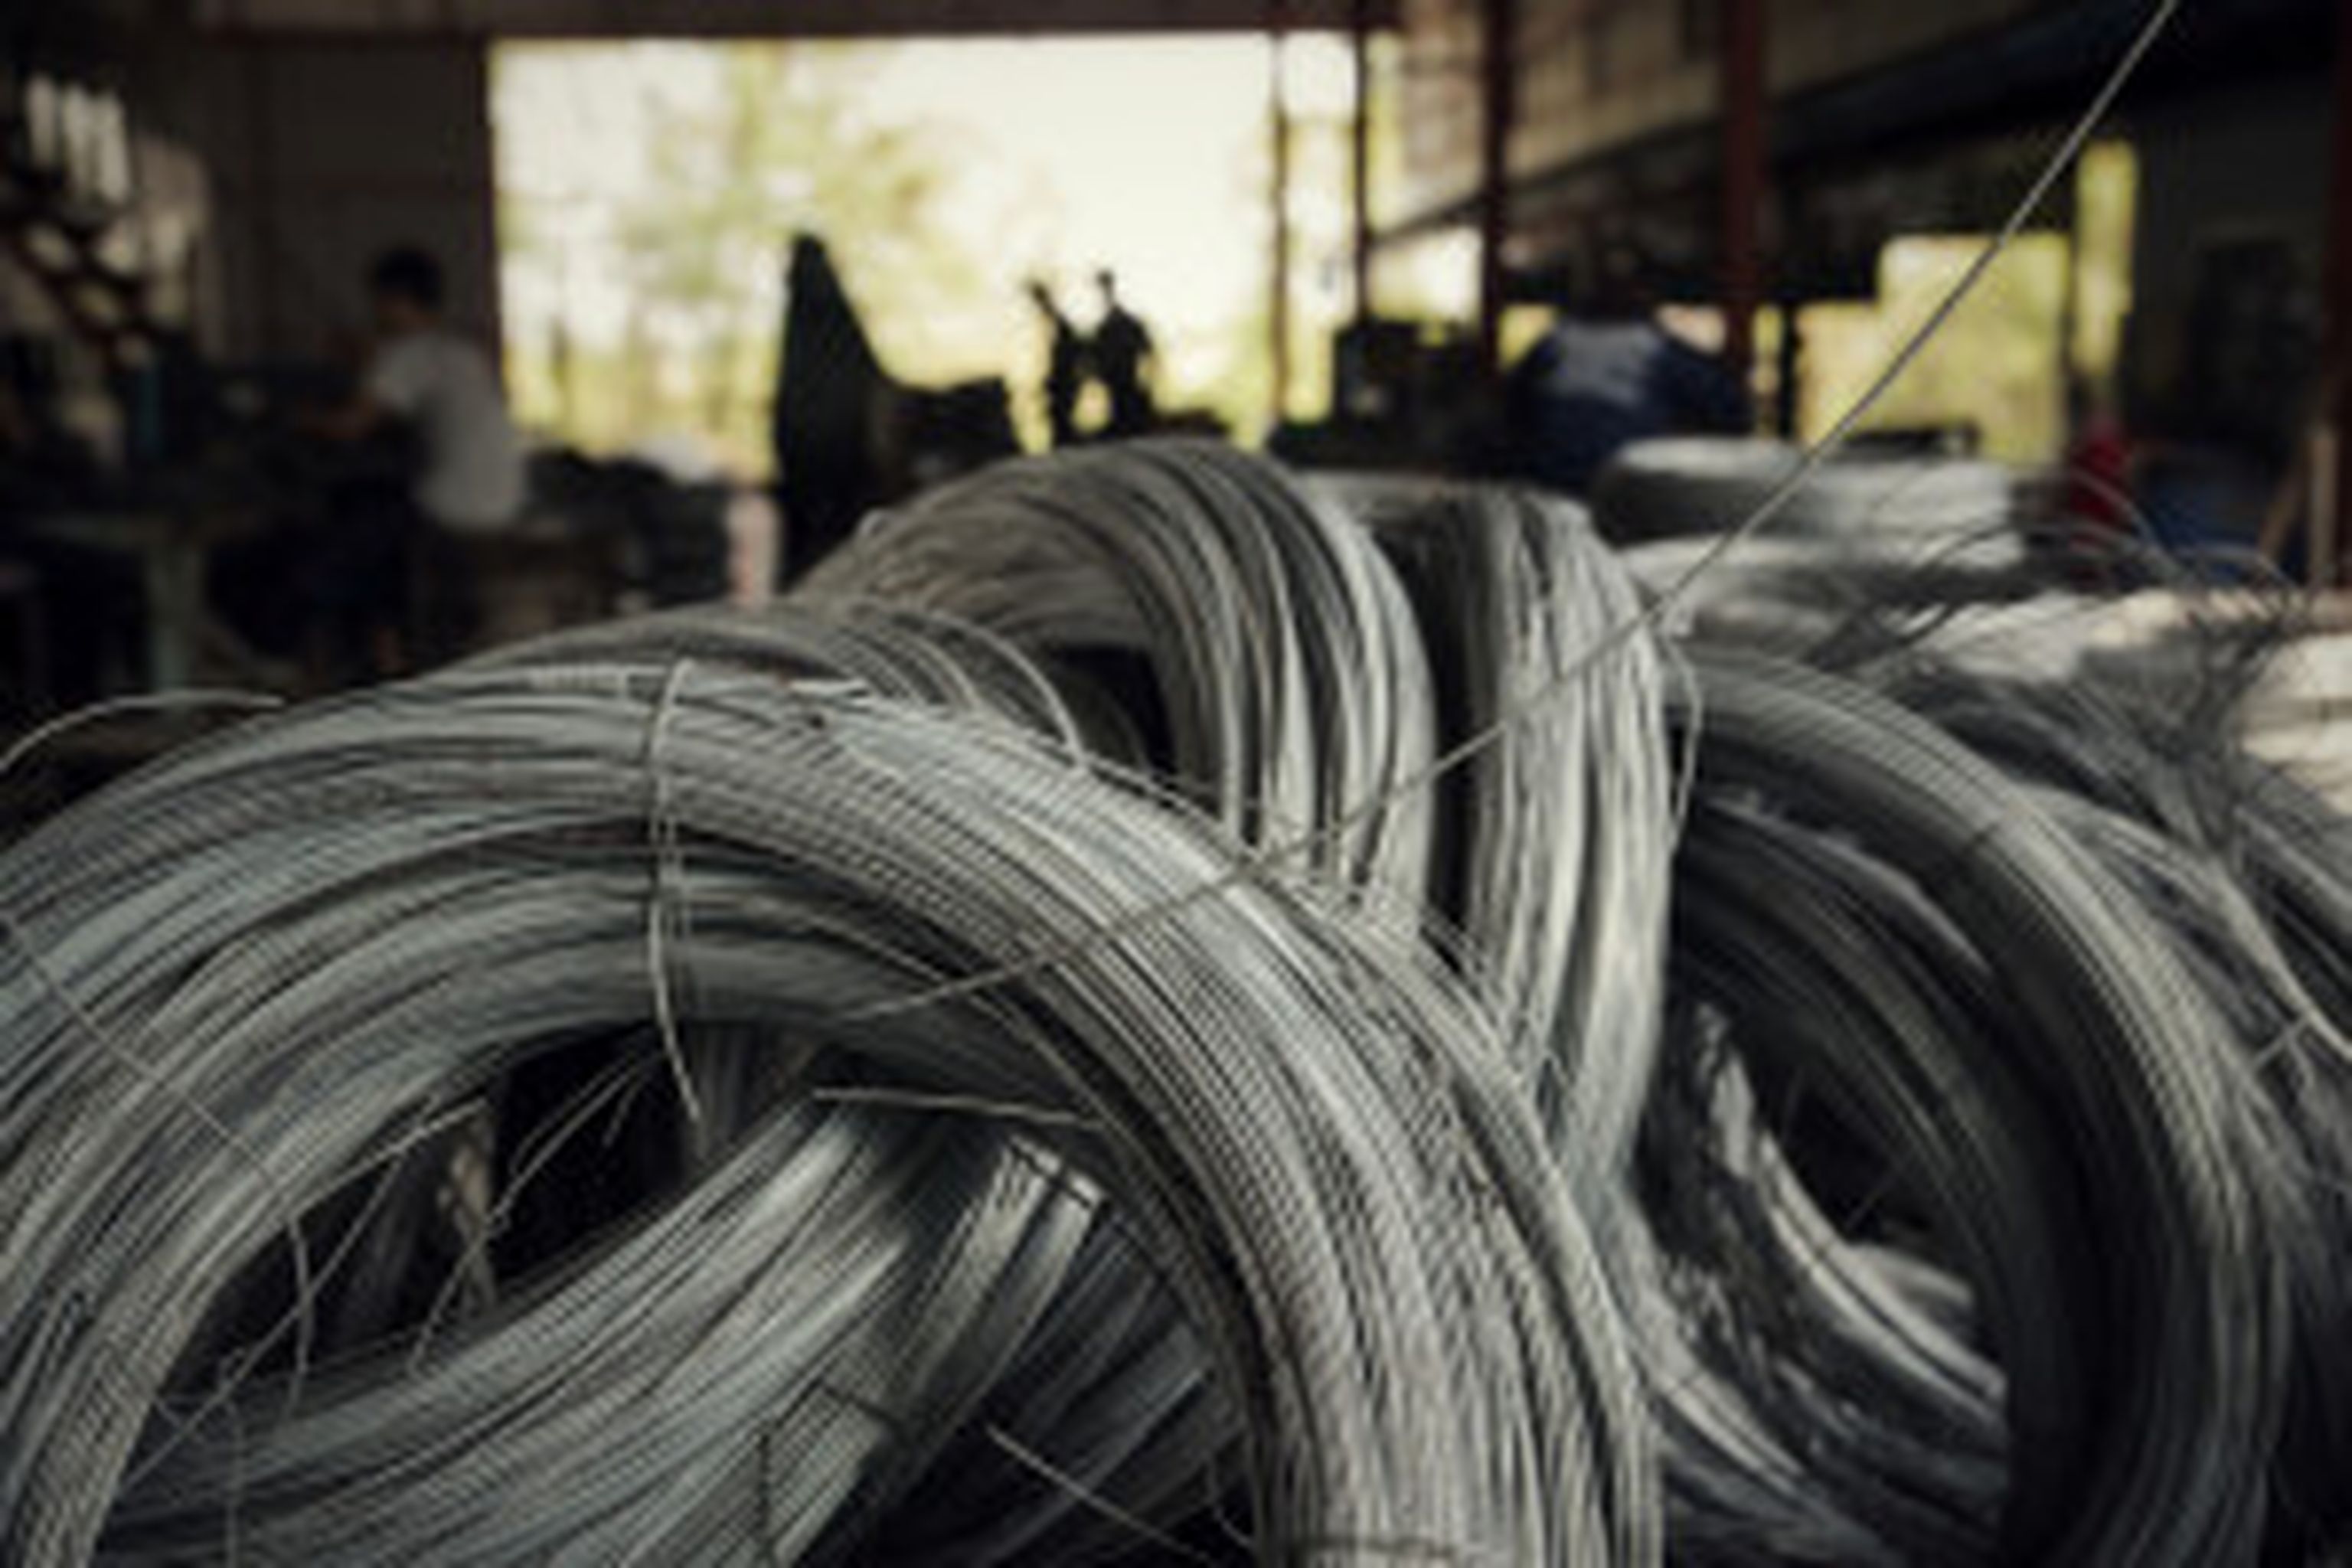 Stainless Steel Wire, Wickwire Warehouse